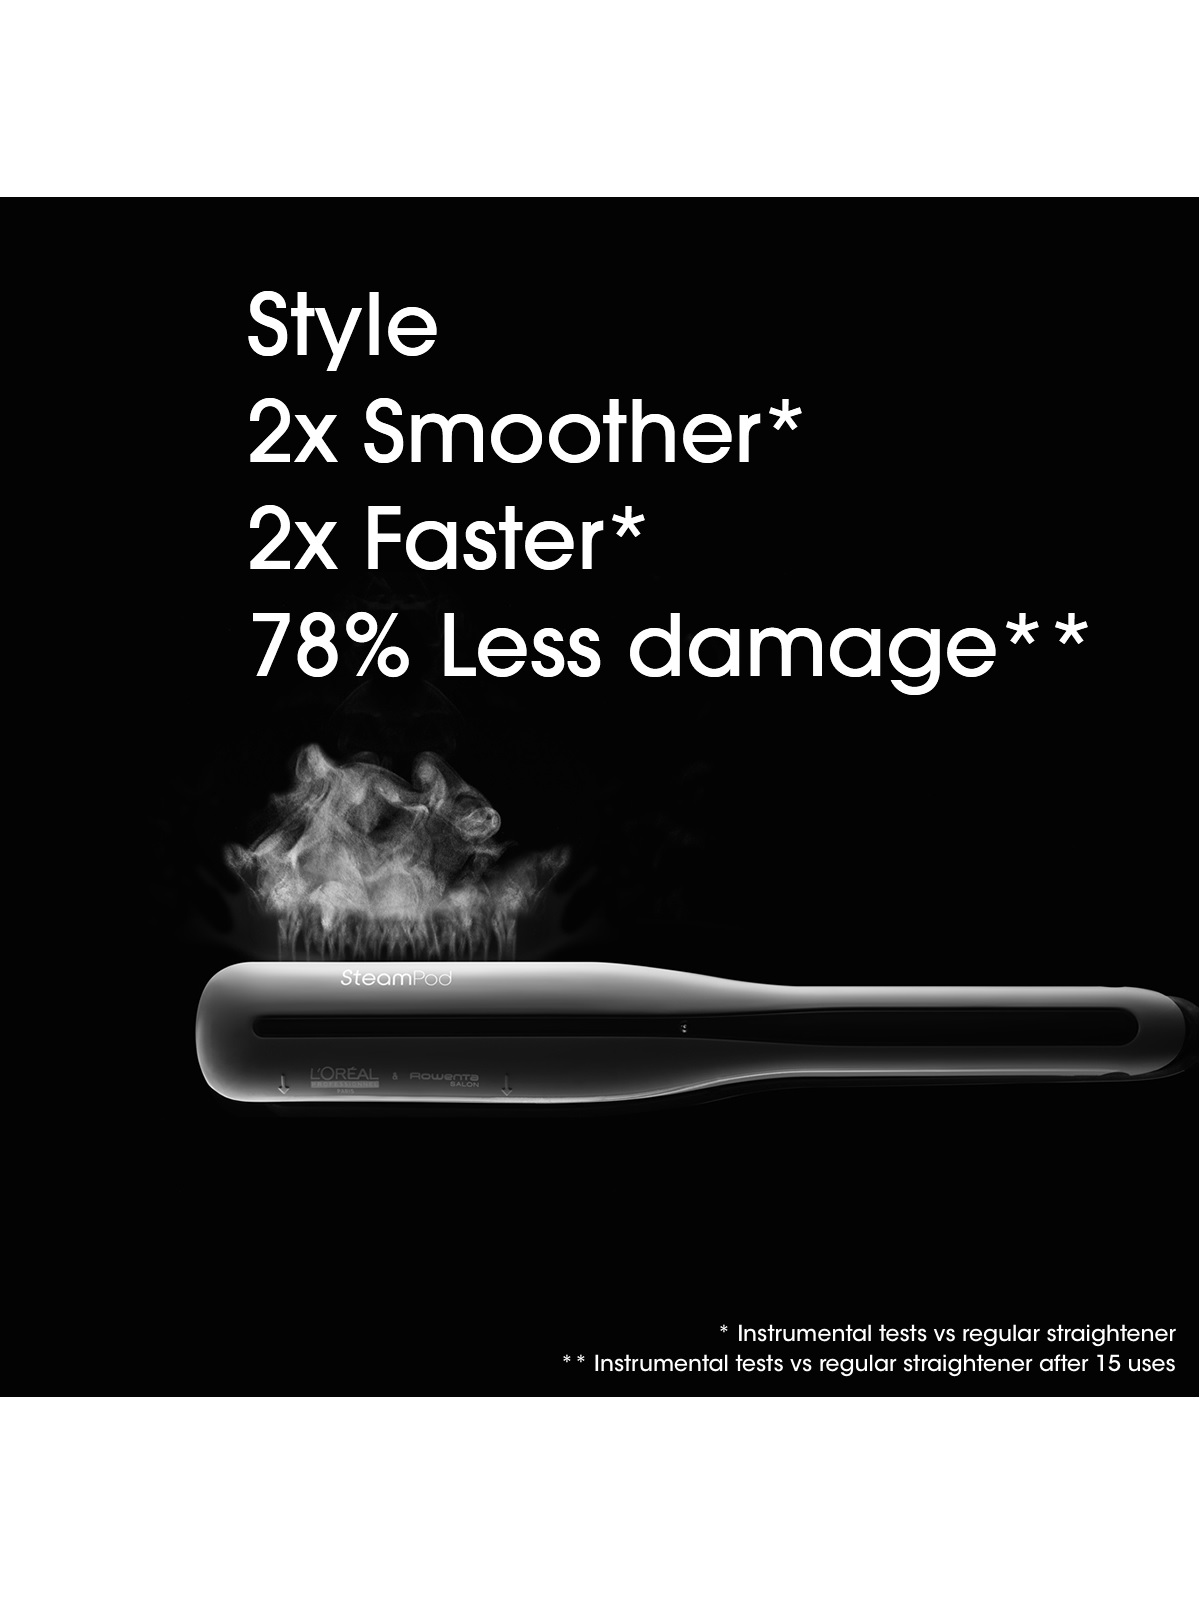 L'Oreal Professionnel Steampod 3.0 Straightener & Styling Tool